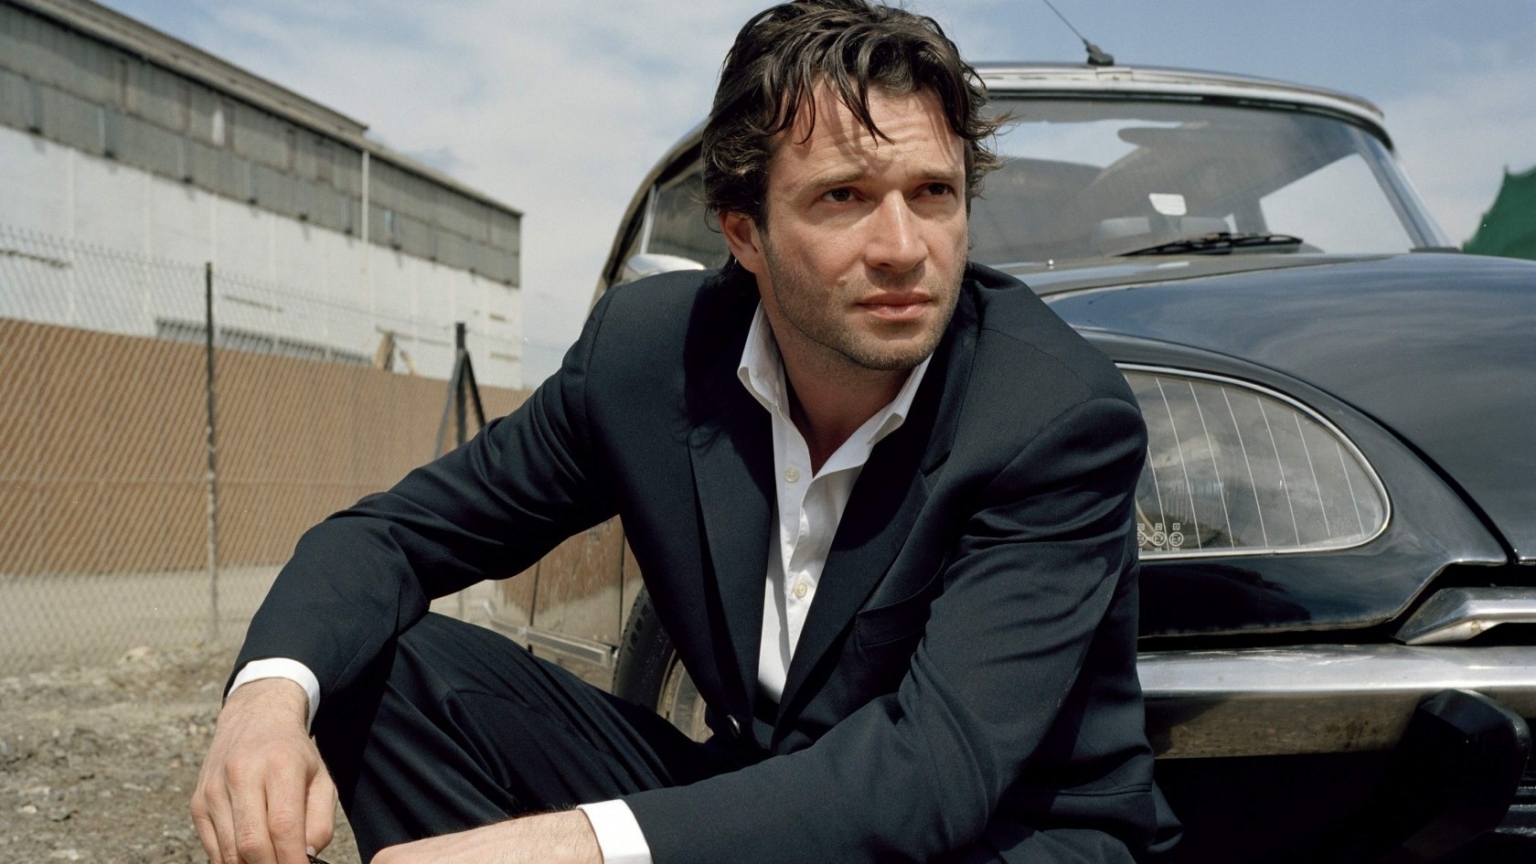 James Purefoy in a Black Suit for 1536 x 864 HDTV resolution